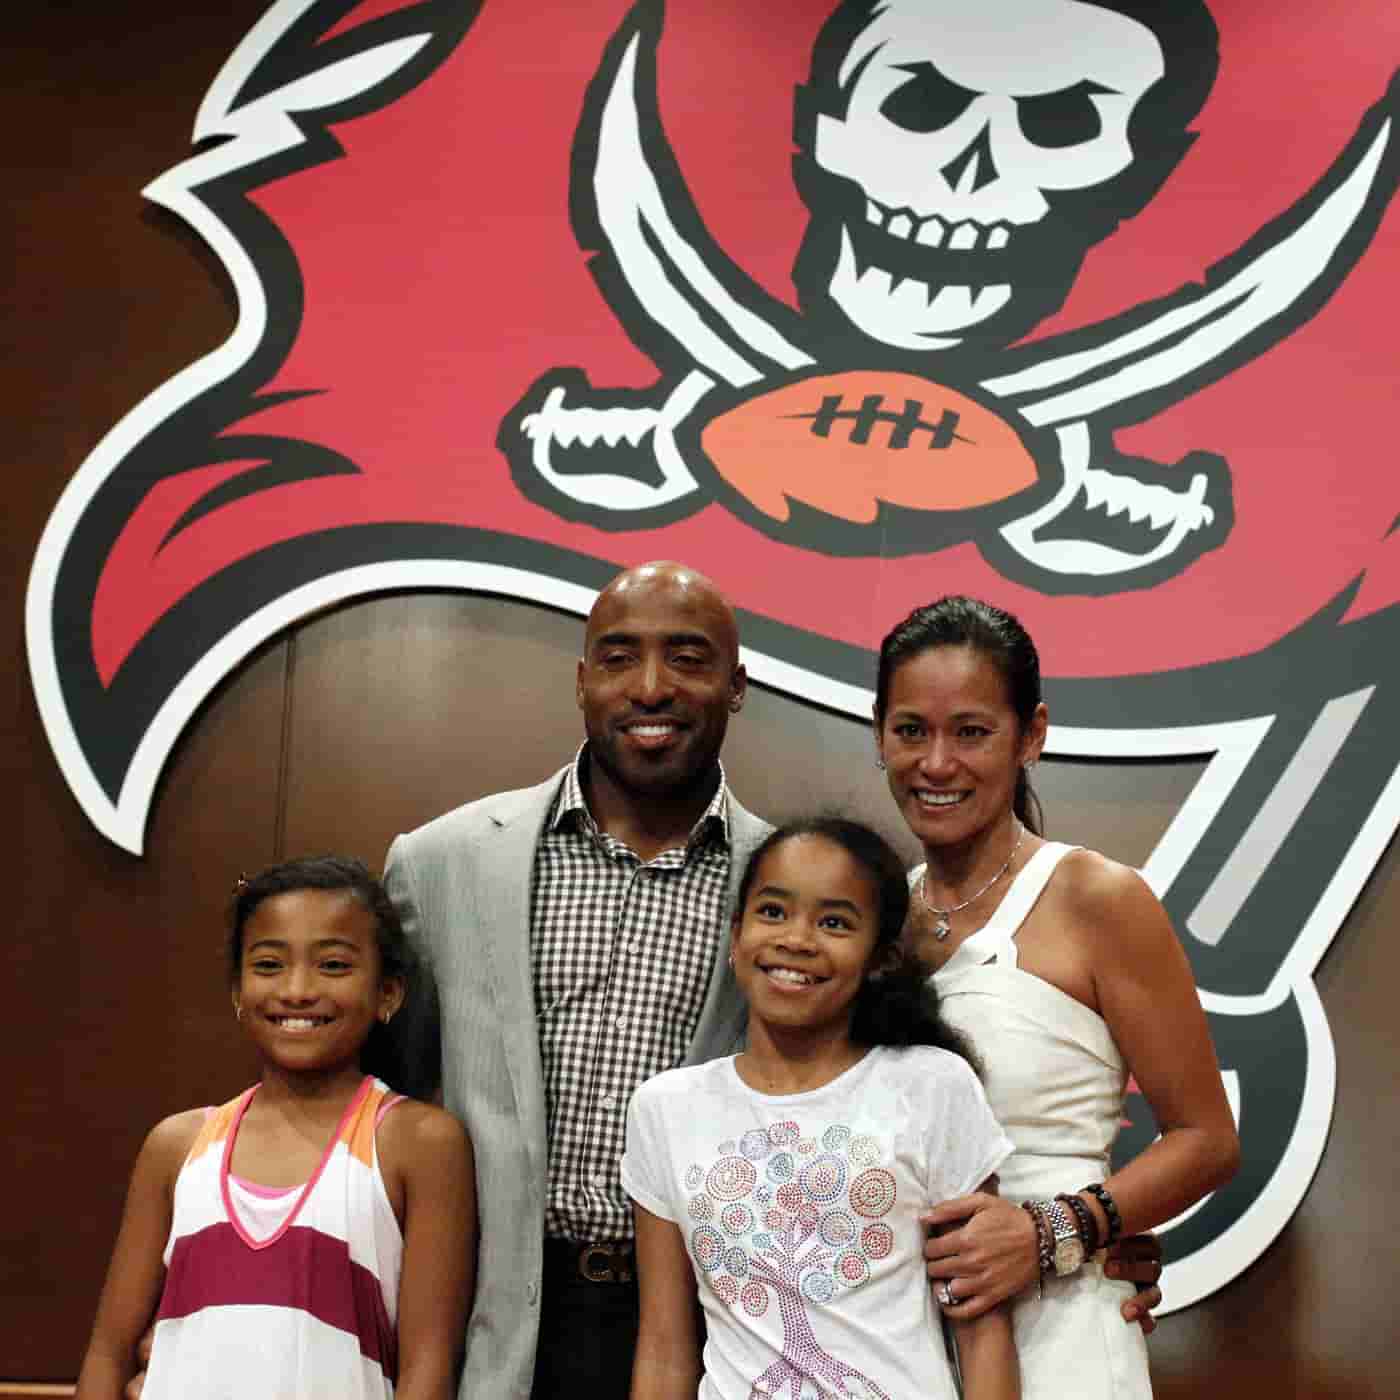 Image of the Professional Football Player and former Sports Broadcaster with his wife and kids 